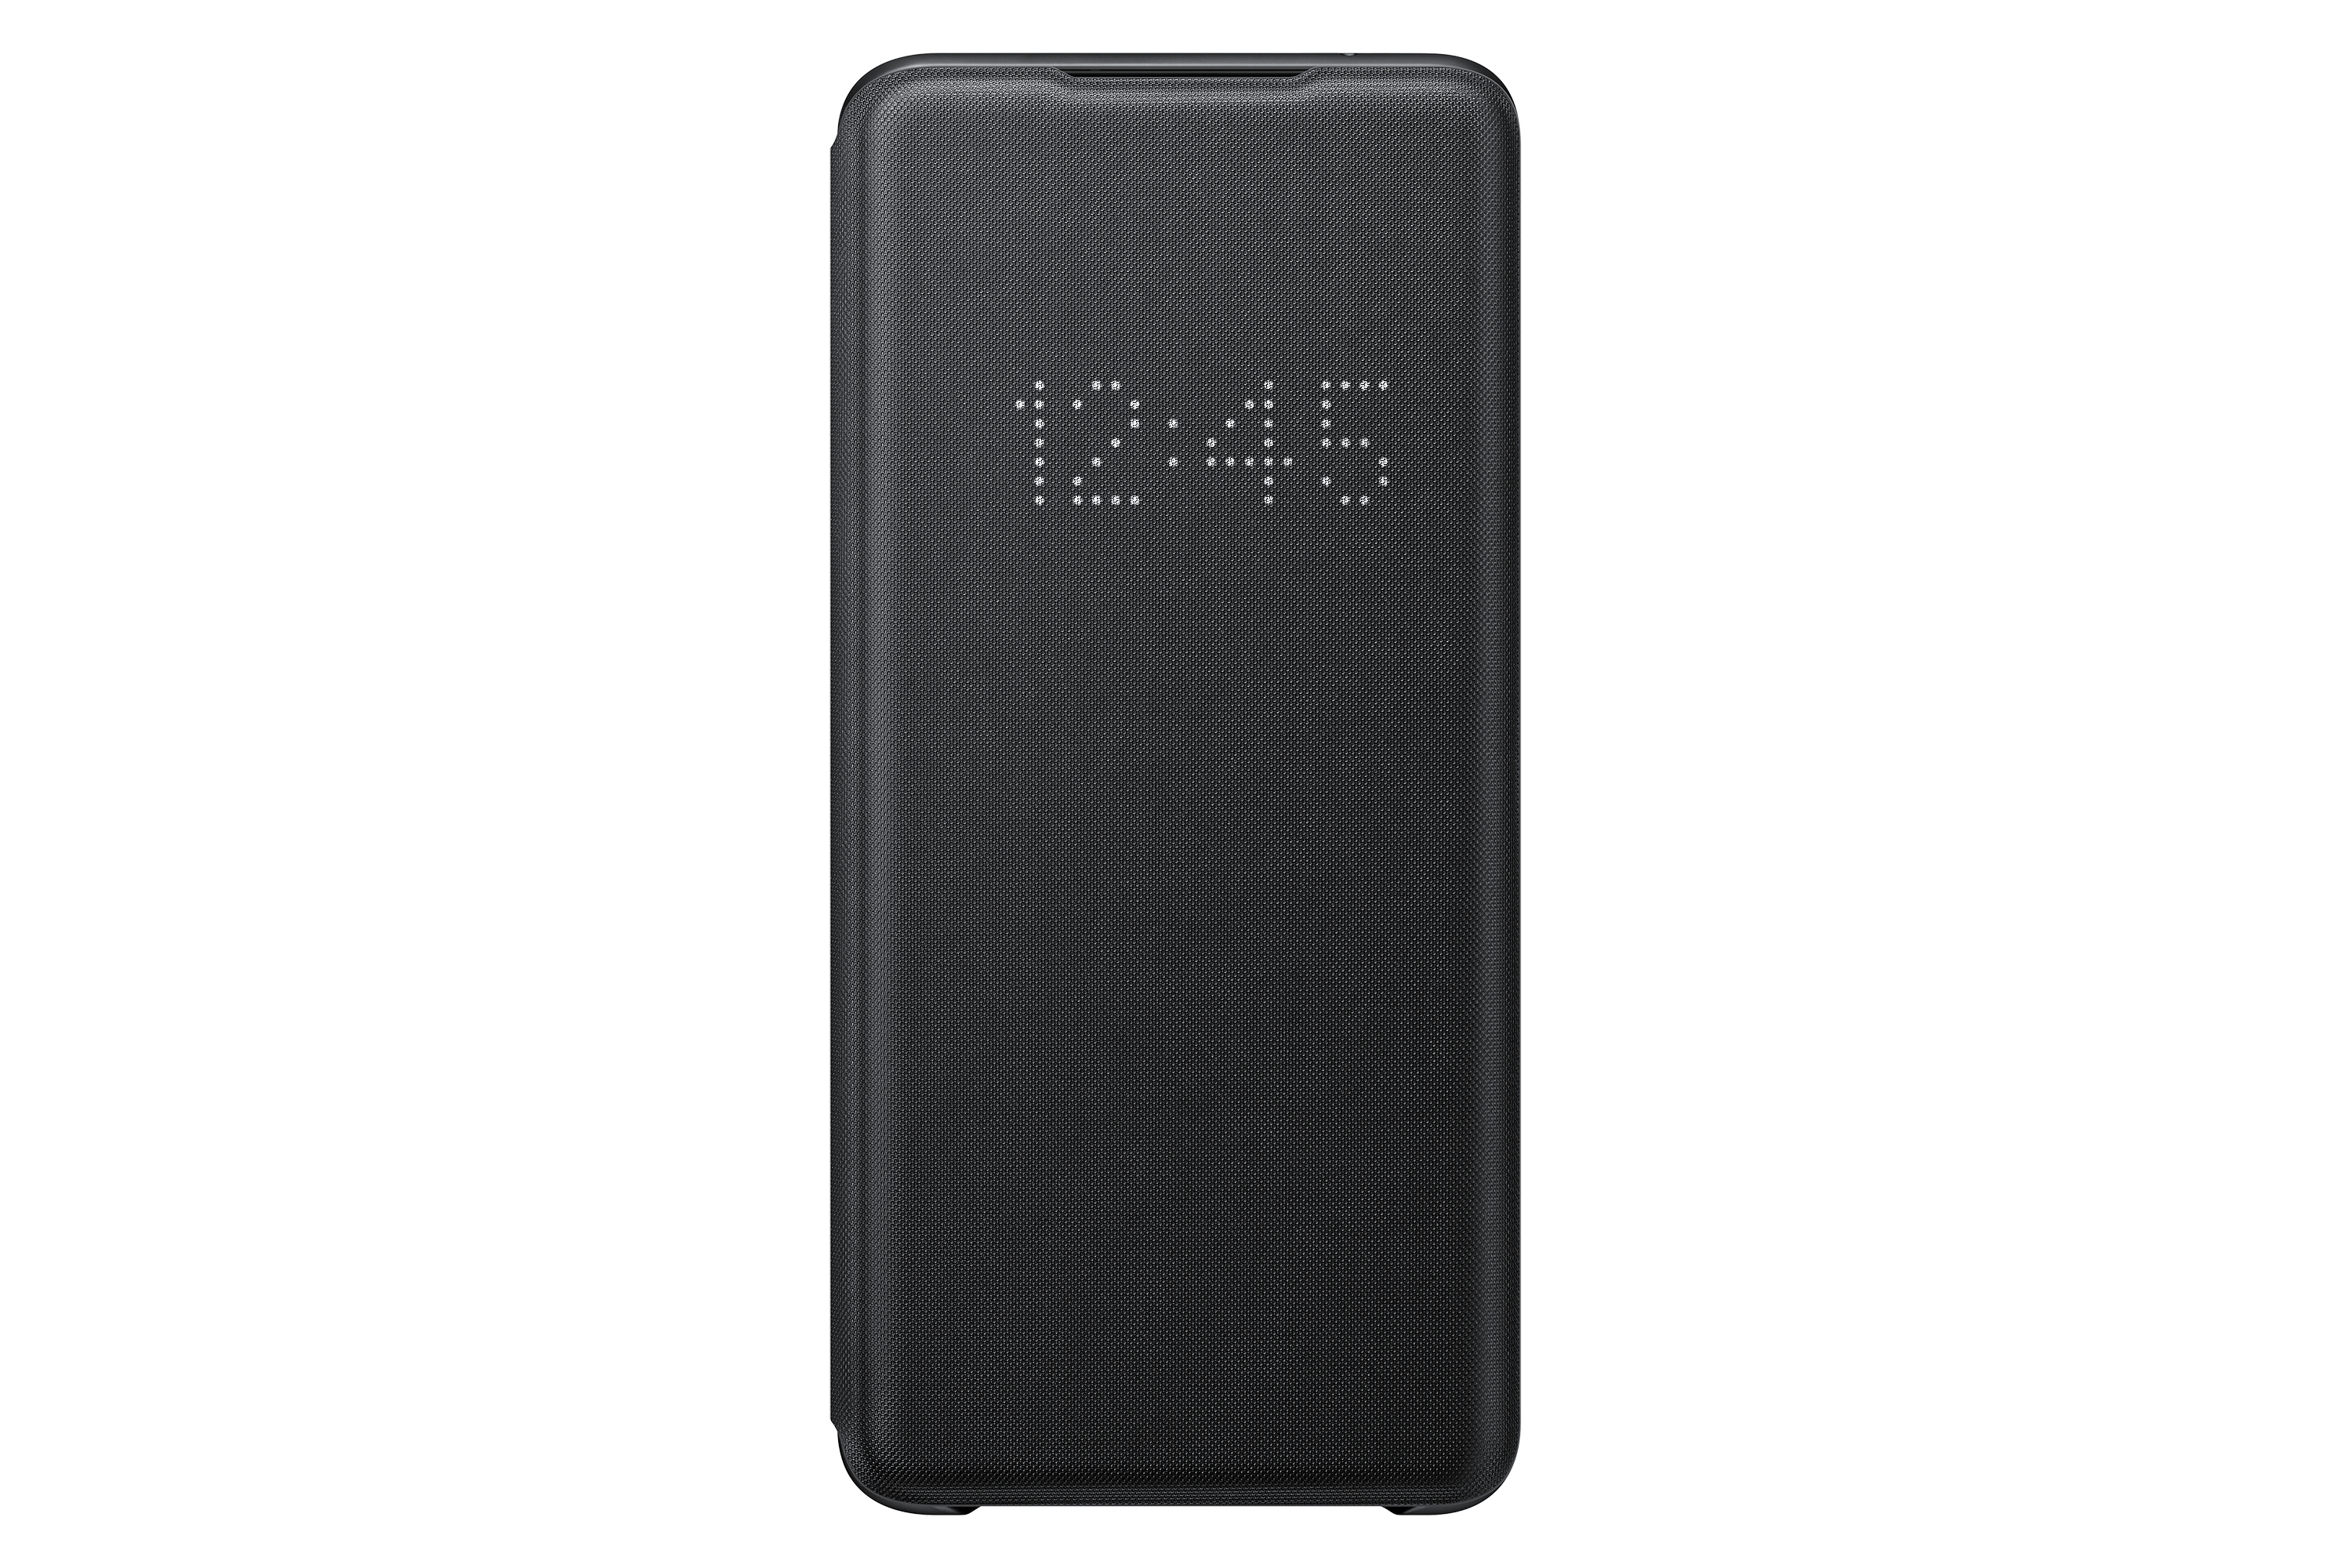 Samsung LED View Cover Black for Galaxy S20 Ultra